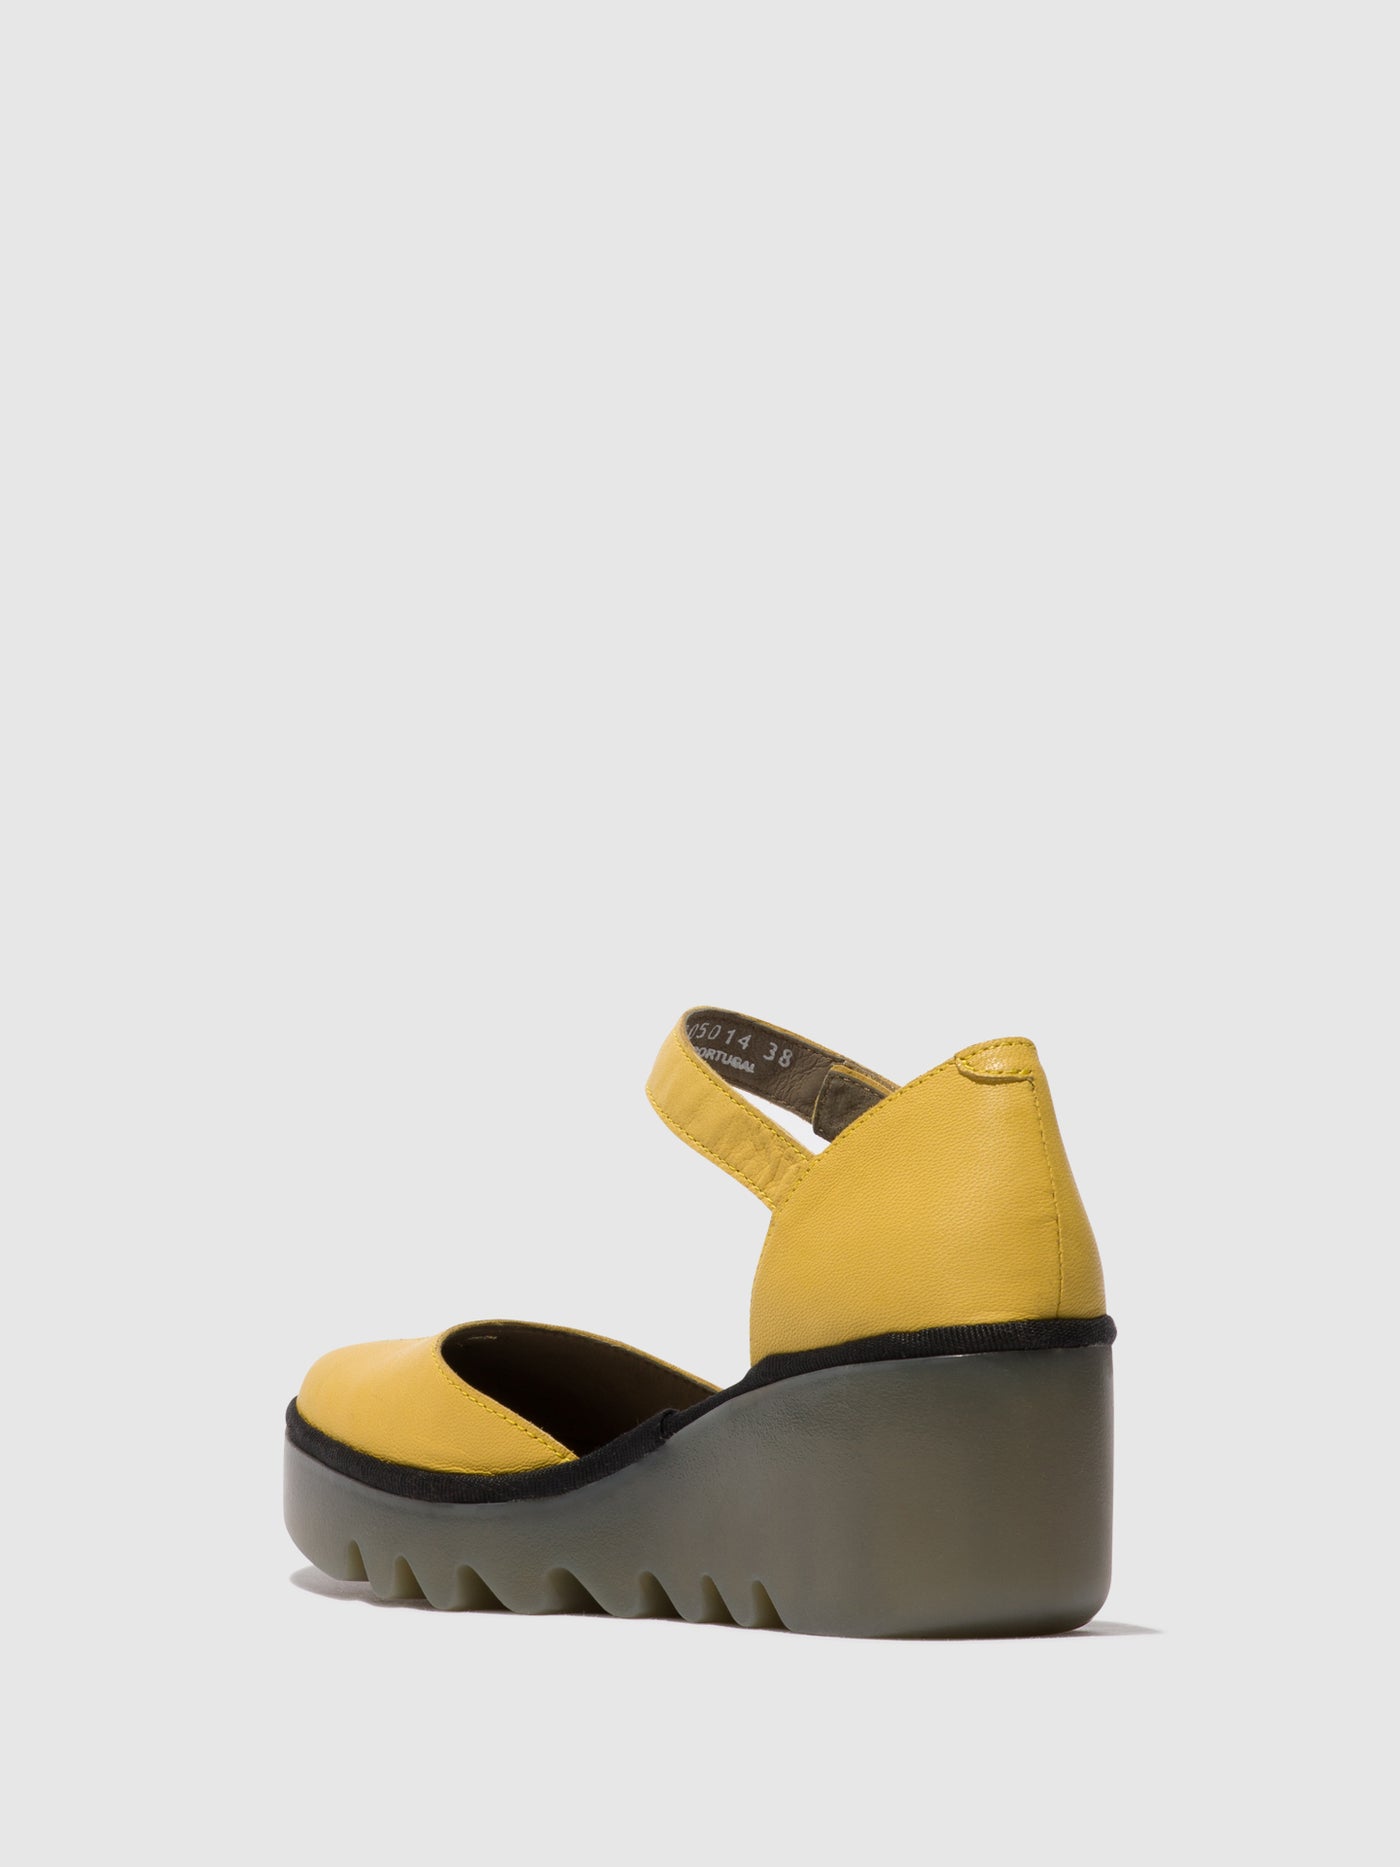 Ankle Strap Sandals BISO305FLY YELLOW